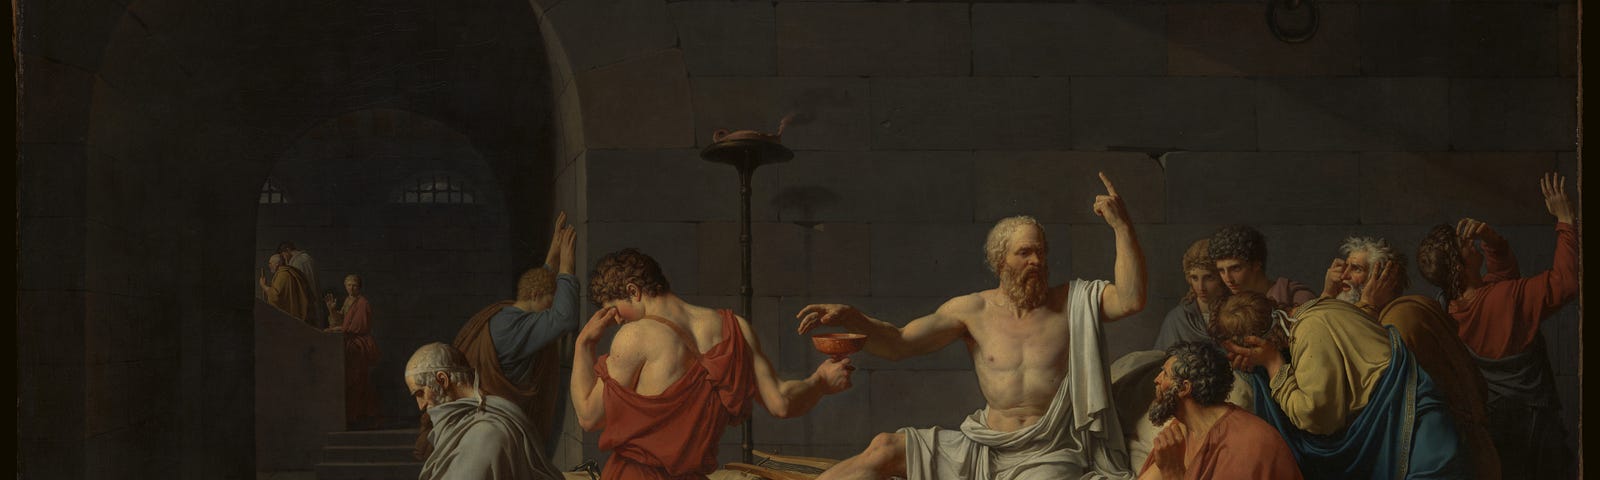 The Neoclassical painting “The Death of Socrates”